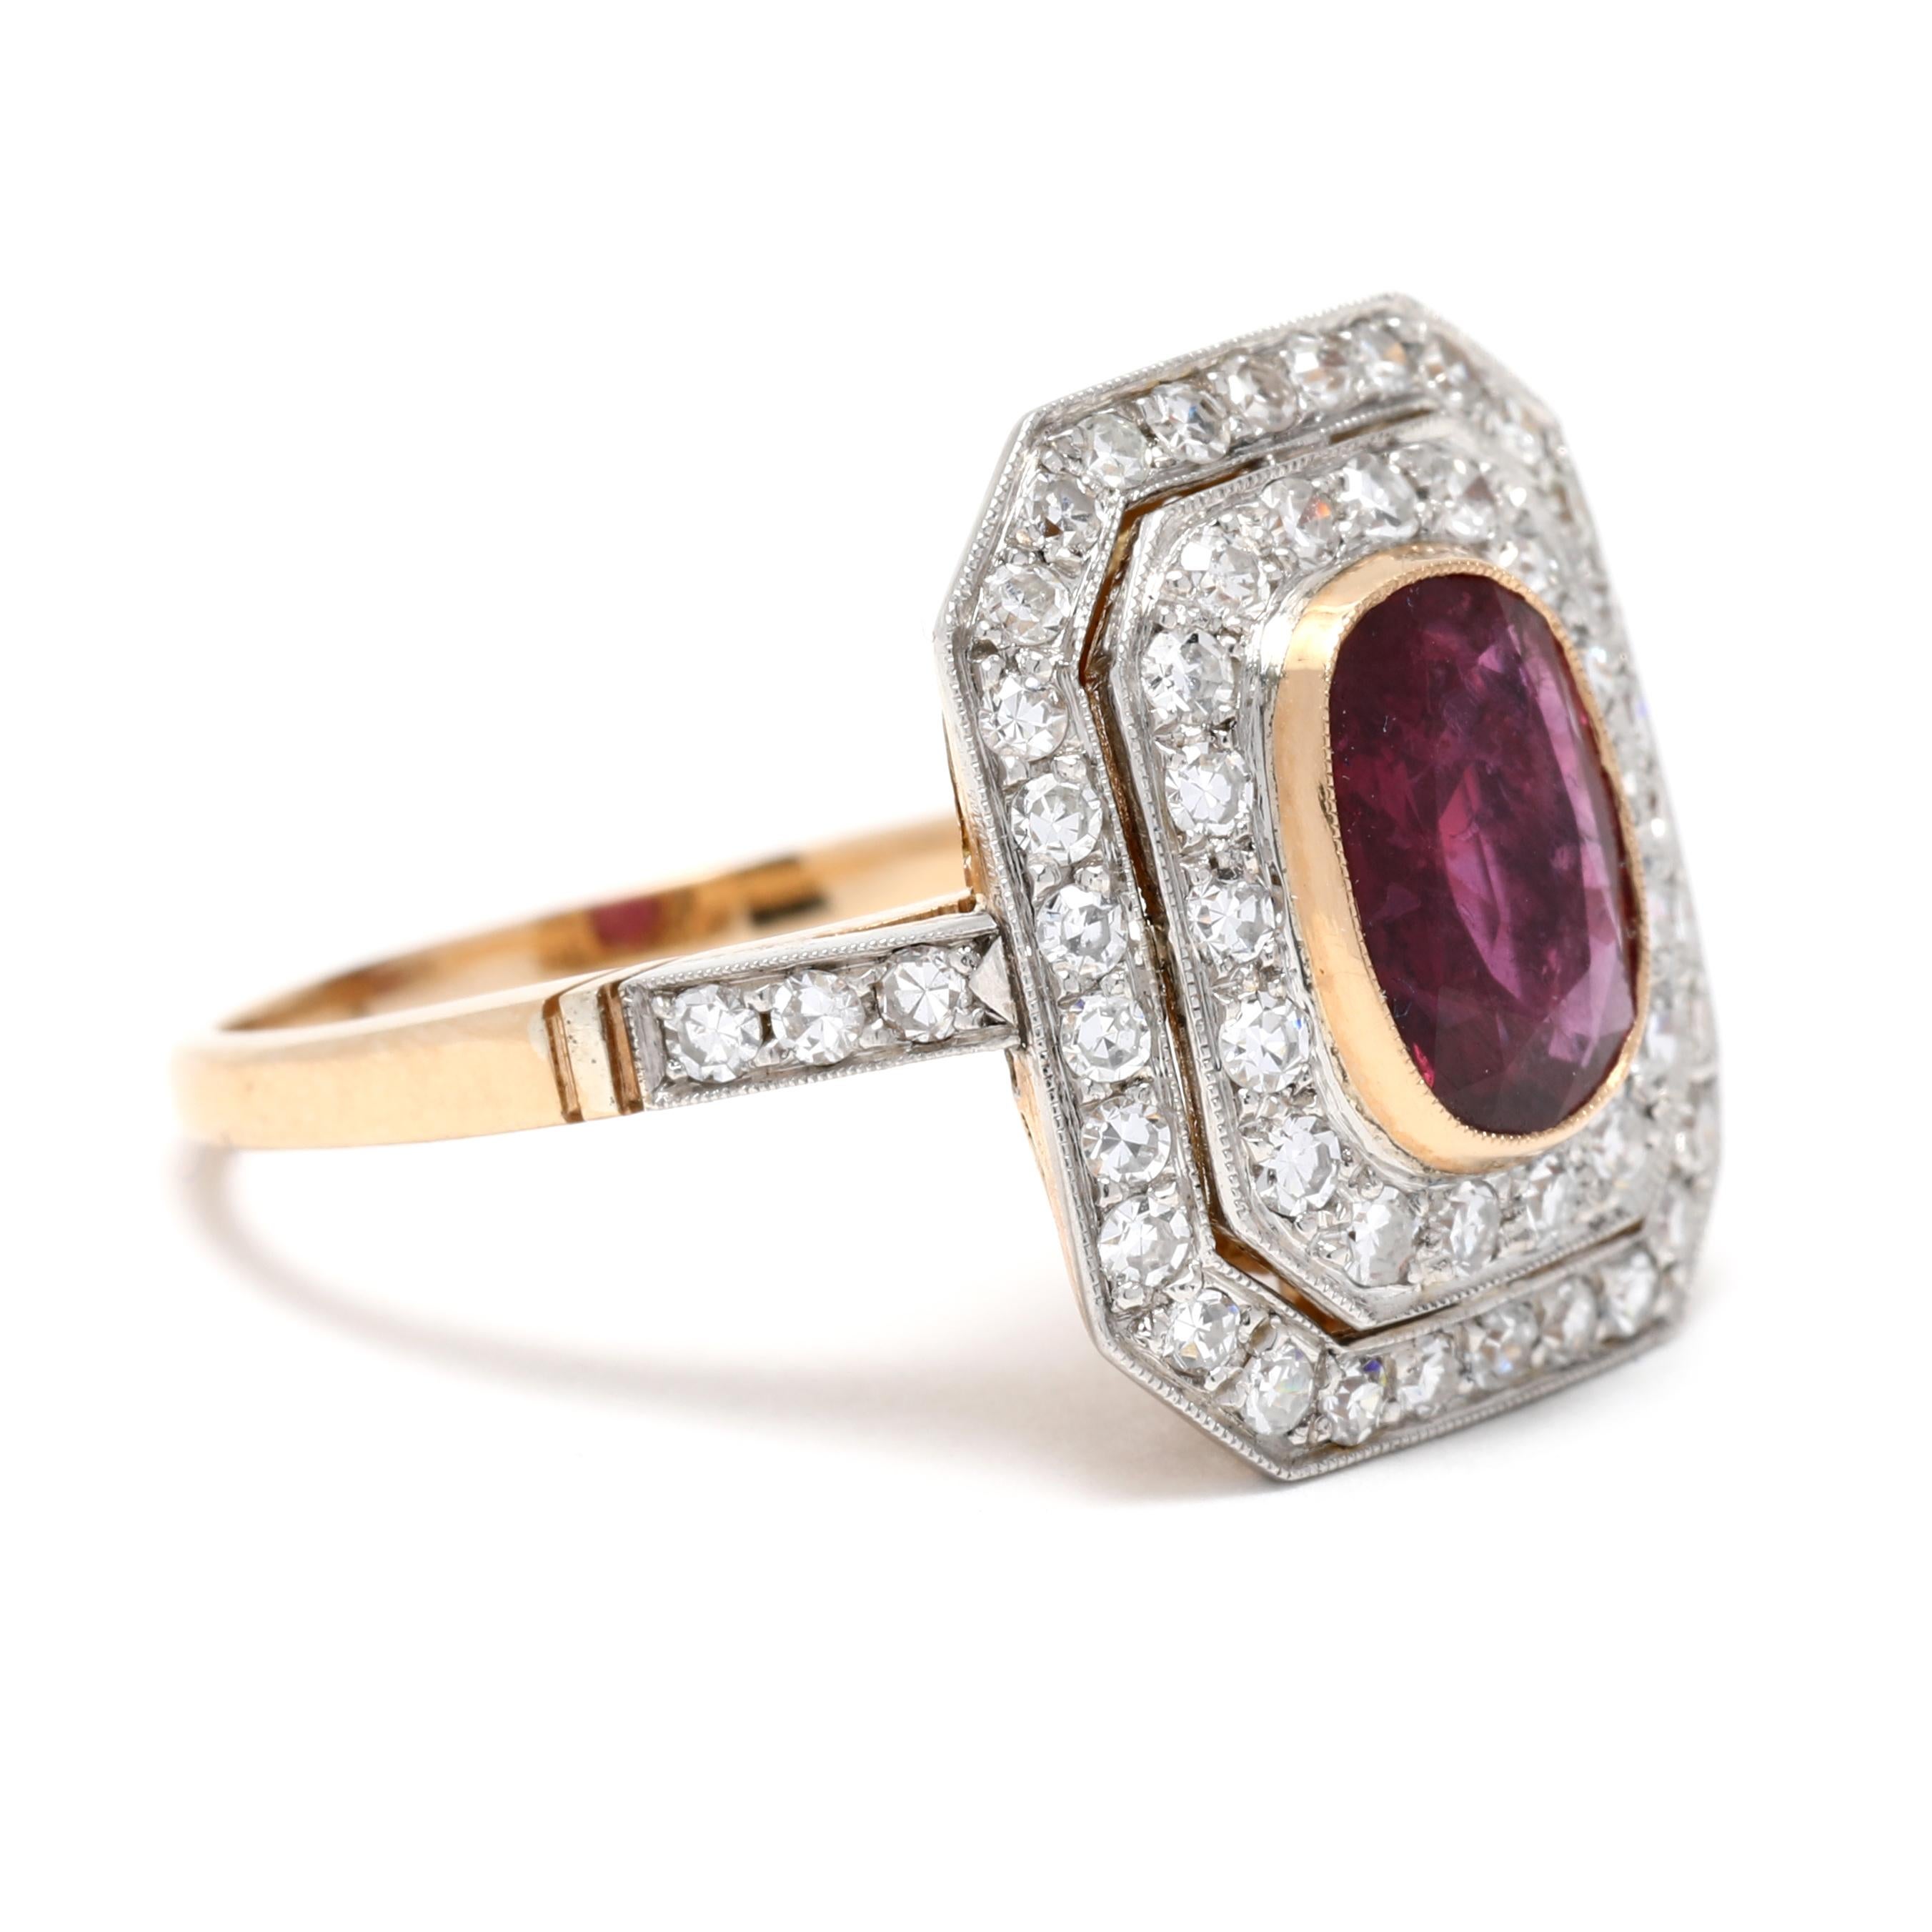 This stunning 2.34ctw ruby and diamond halo cocktail ring is the perfect combination of classic style and modern sophistication. Crafted in 18K yellow and white gold, this art deco-style ring features a stunning oval-cut ruby at the center with a